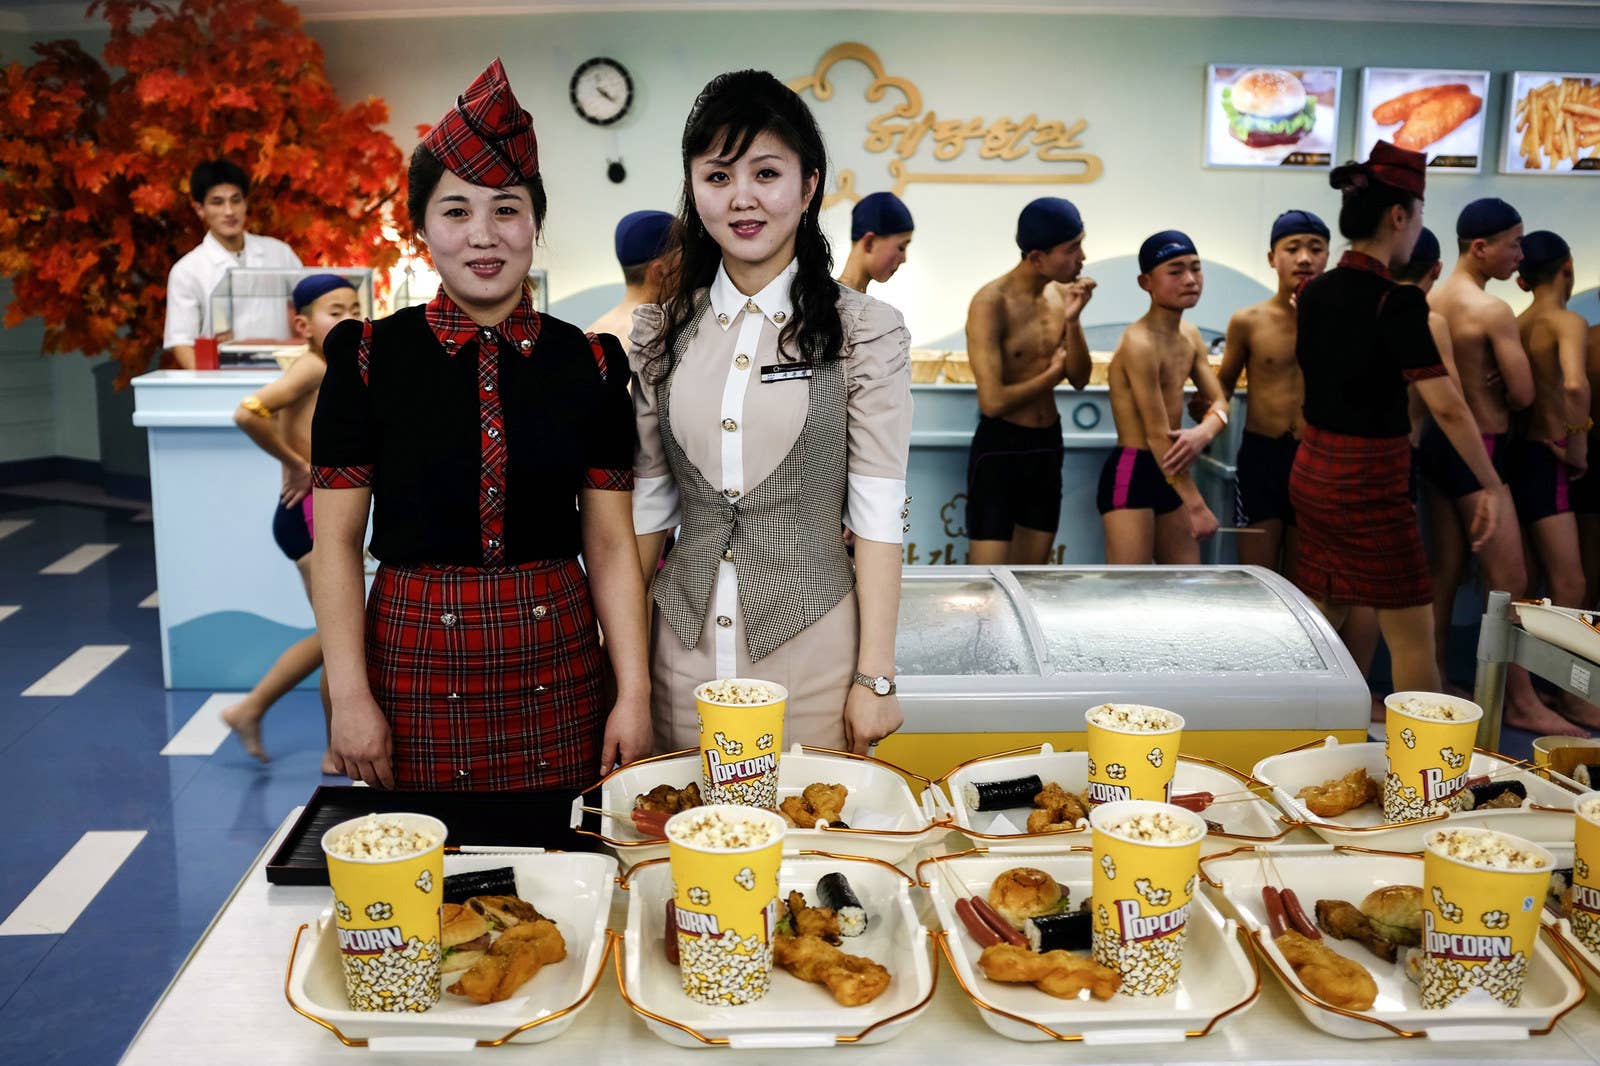 North Korean fast food and US '50s outfits in Munsu Water Park in Pyongyang.